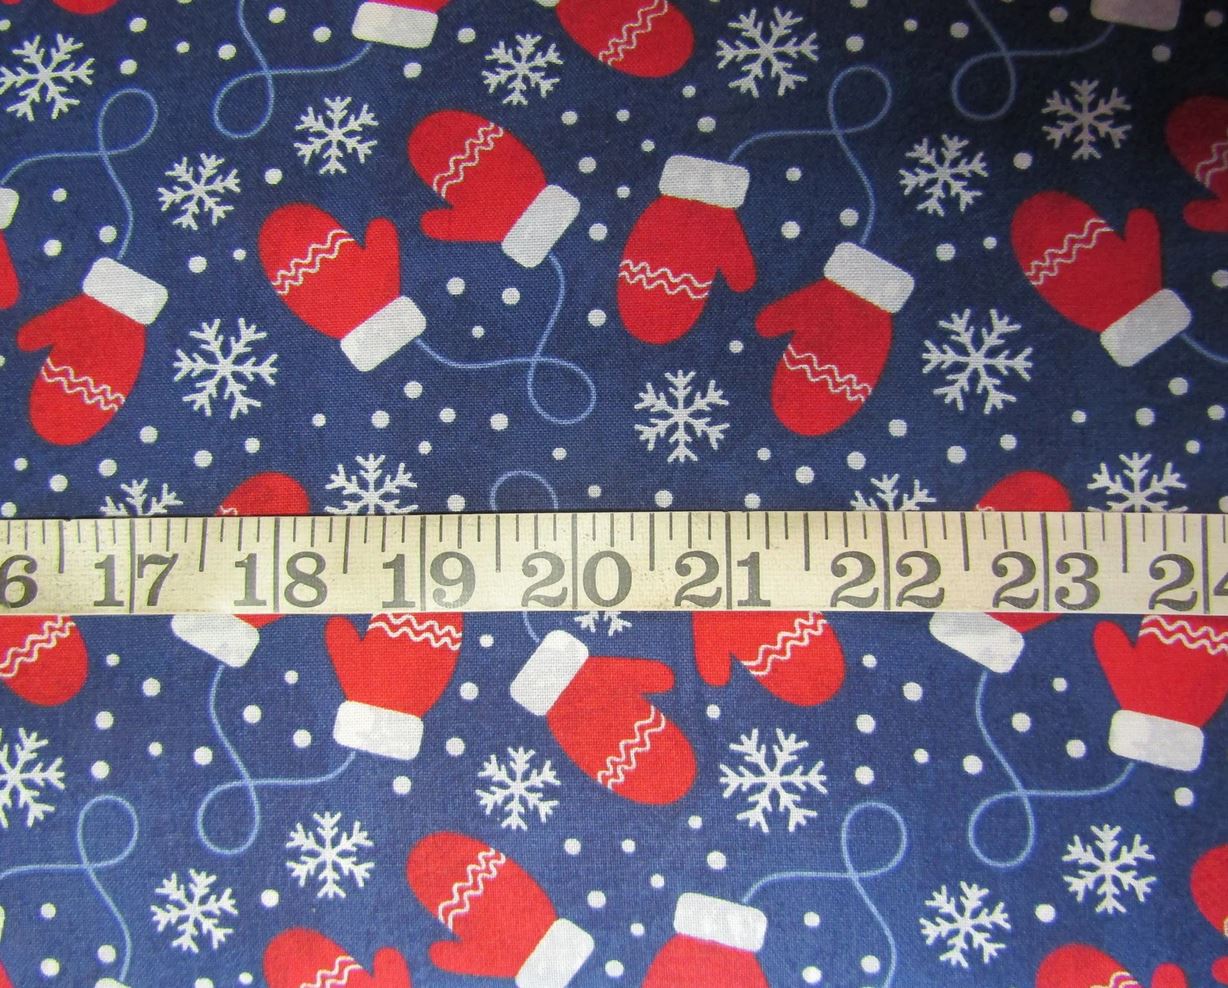 45 x 36 Christmas Red Mittens and Snowflakes on Blue 100% Cotton Fabric